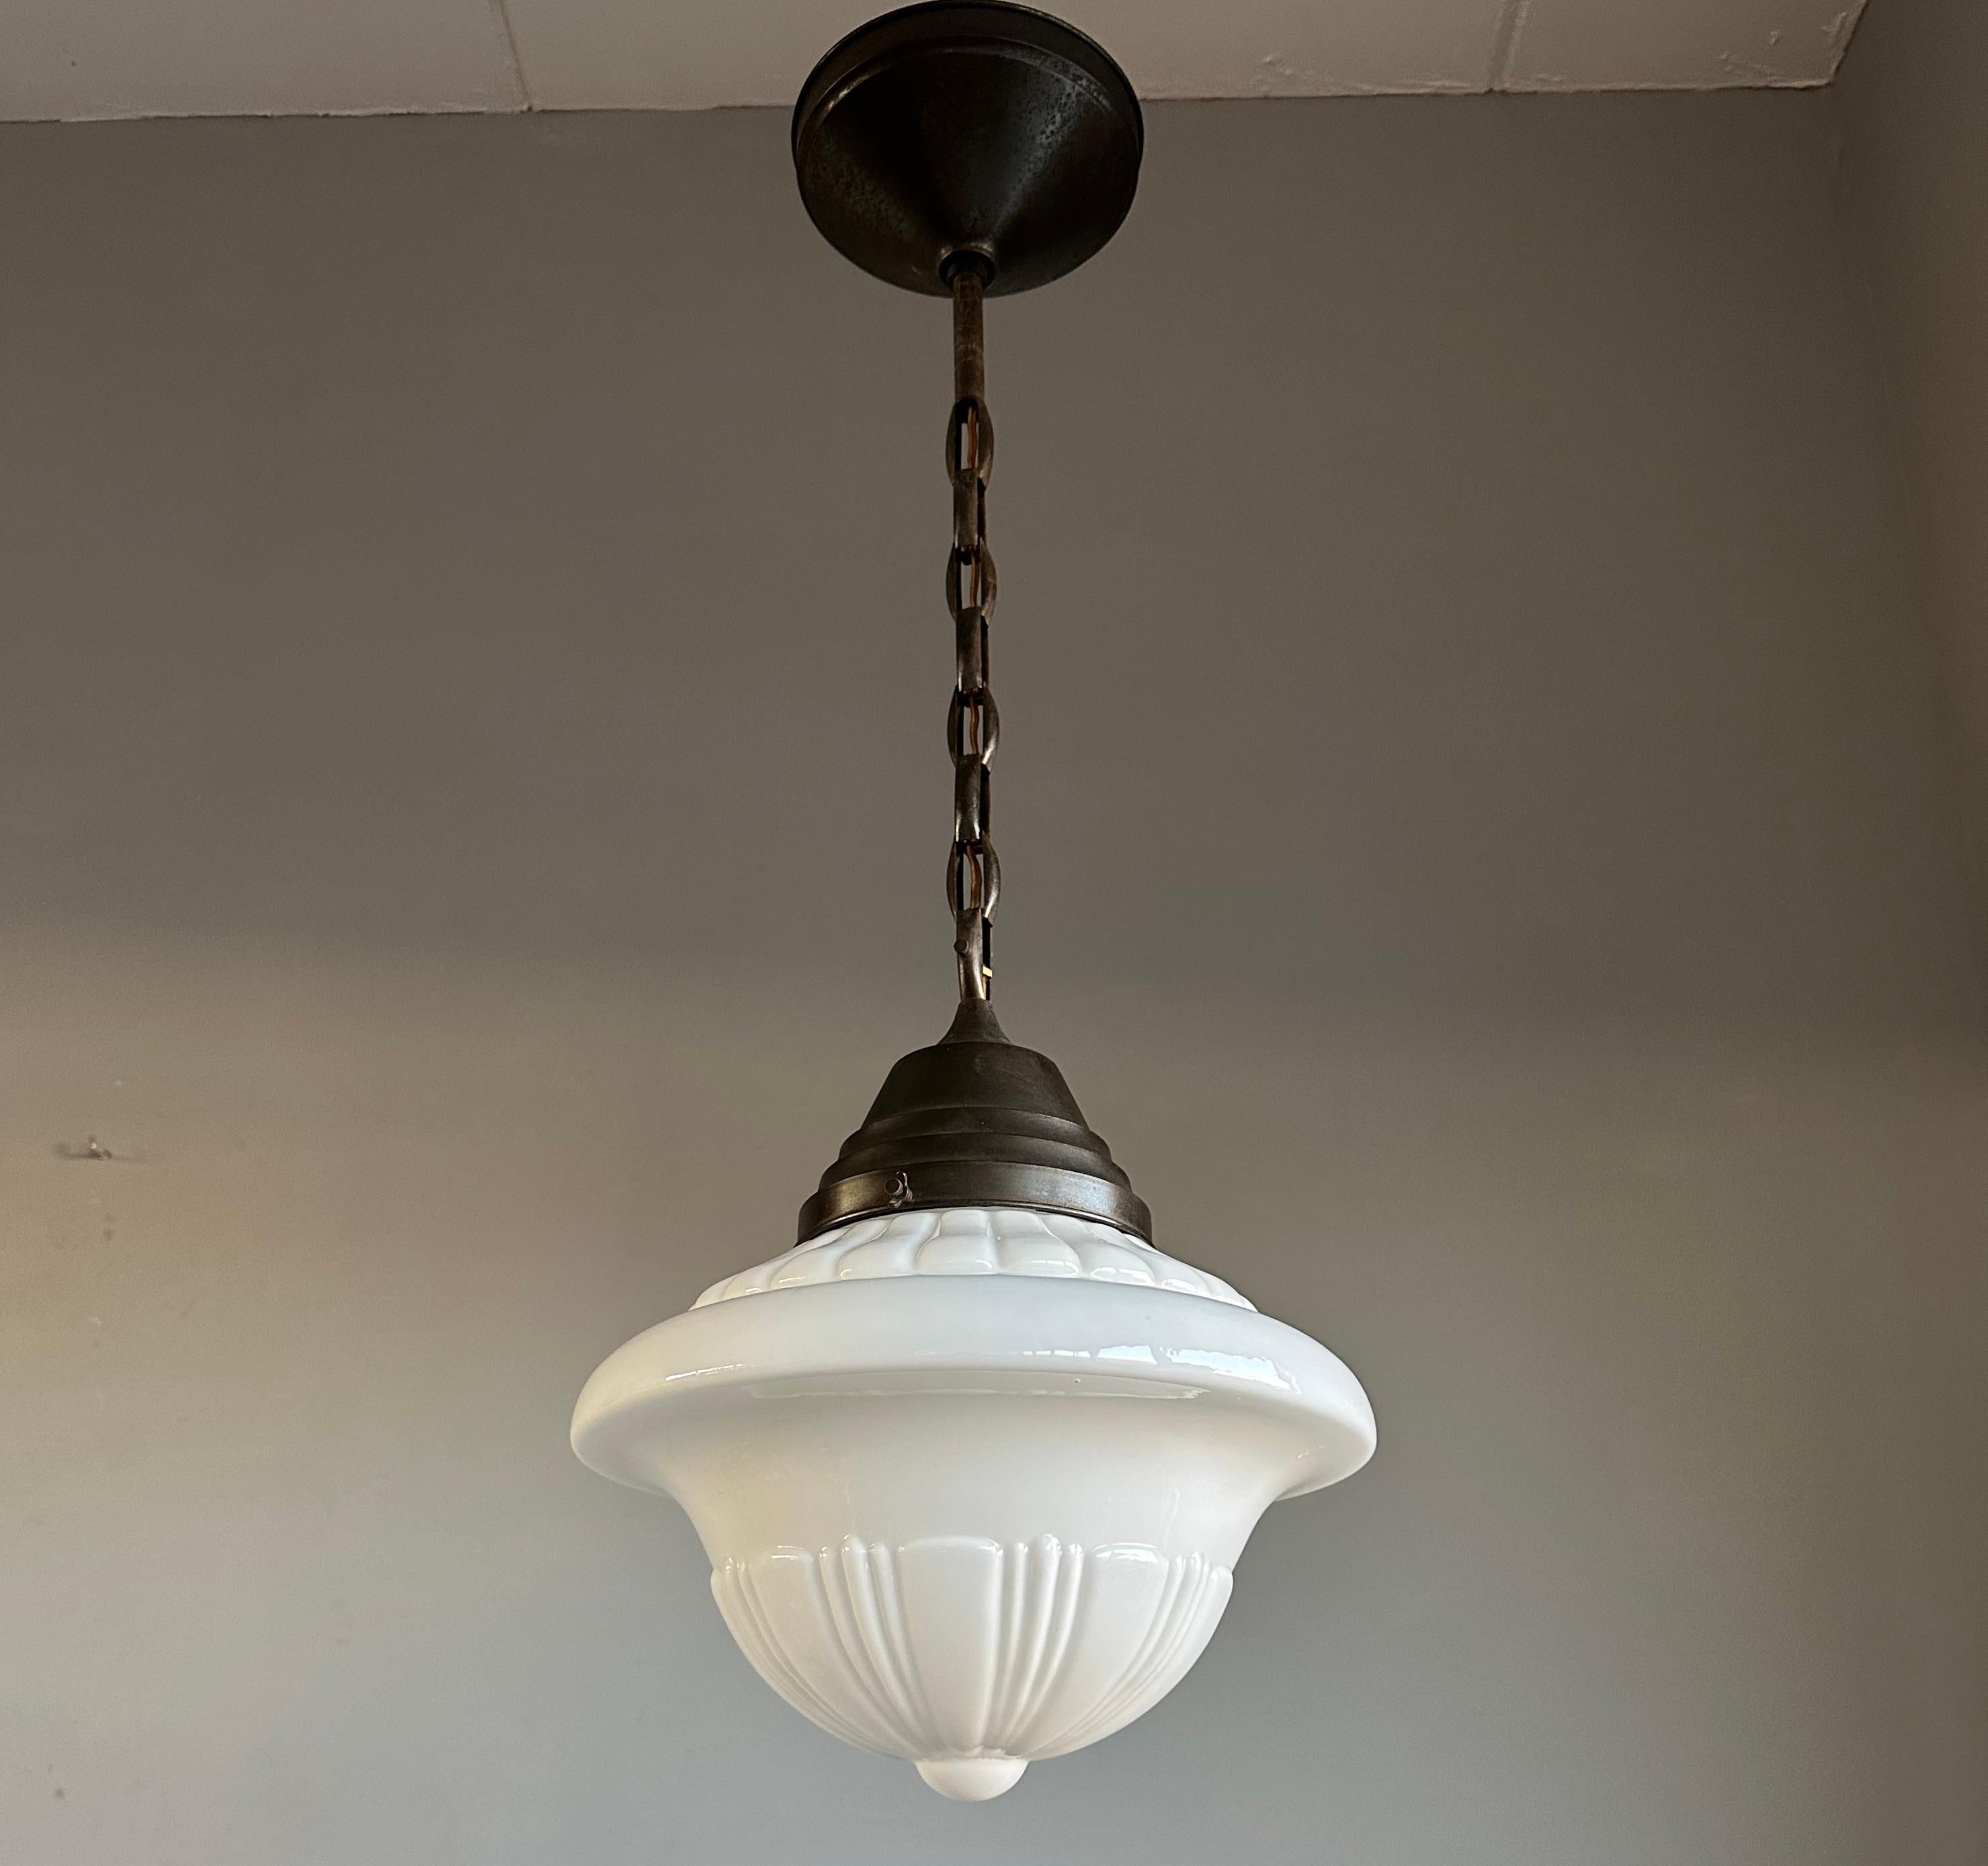 Highly stylish glass-art pendant light with stunning chain. 

This rare and stunning 1920s Art Deco pendant is of museum quality and condition. The combination of the beautifully designed, clean white shade and the excellent brass chain is a match